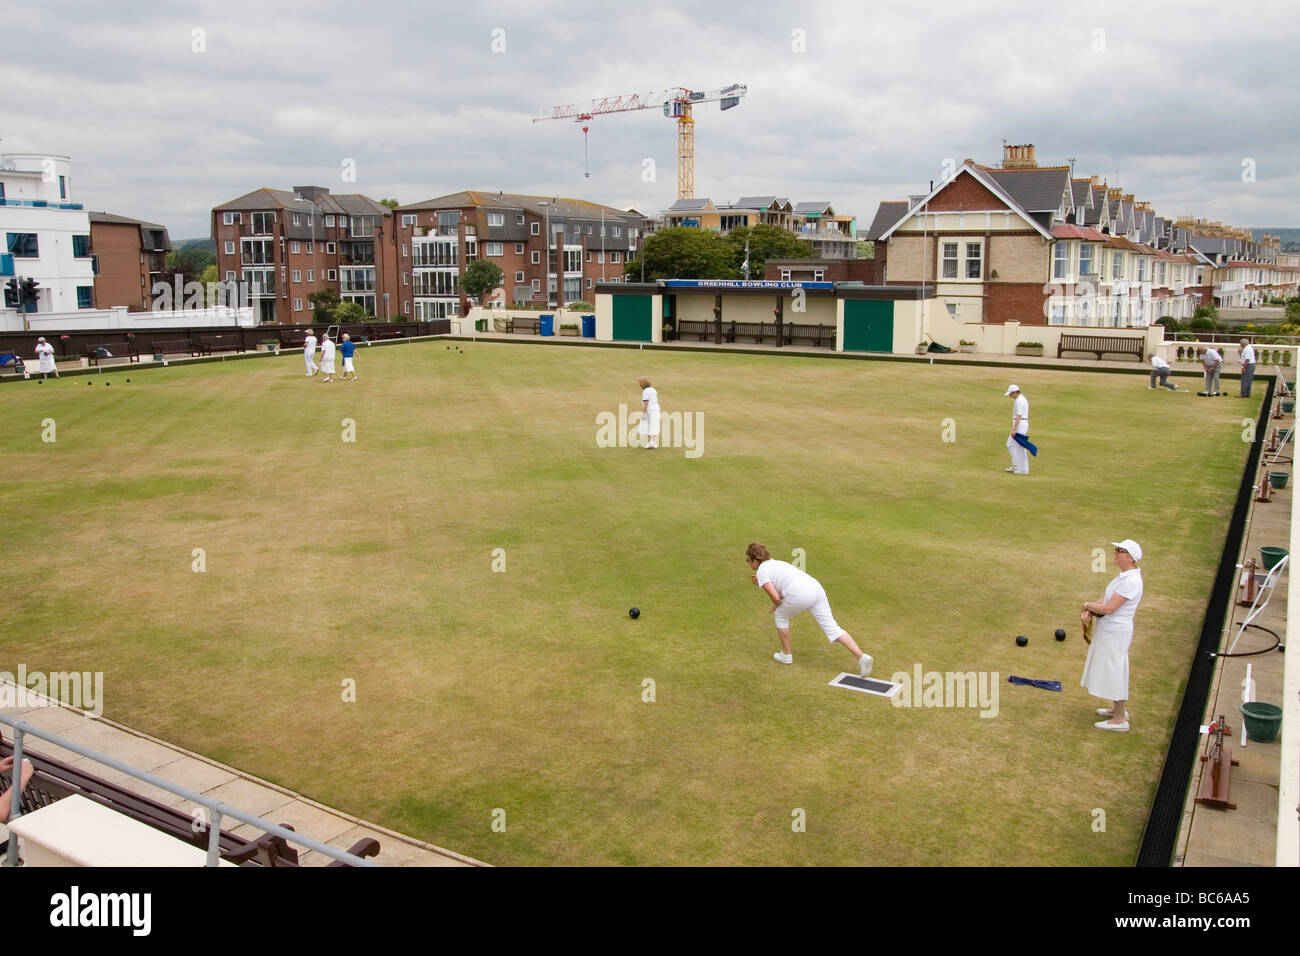 A bowling green on the coastline of Weymouth. Stock Photo